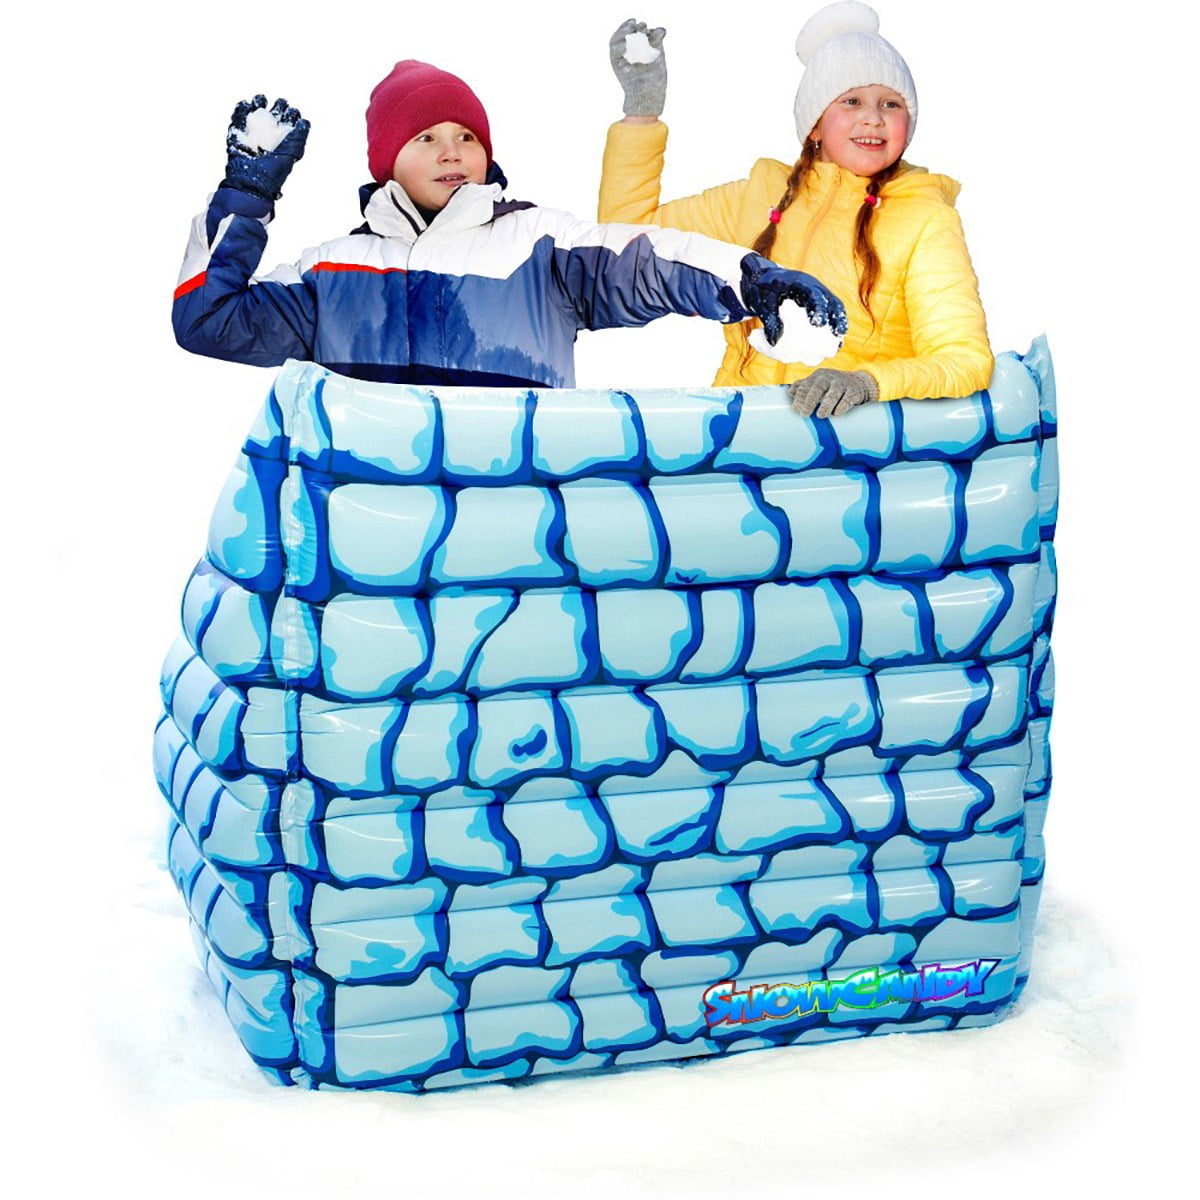 Jumbo Heavy Duty Inflatable Snow Bunker Outdoor Fun Year Around By Snow Candy 